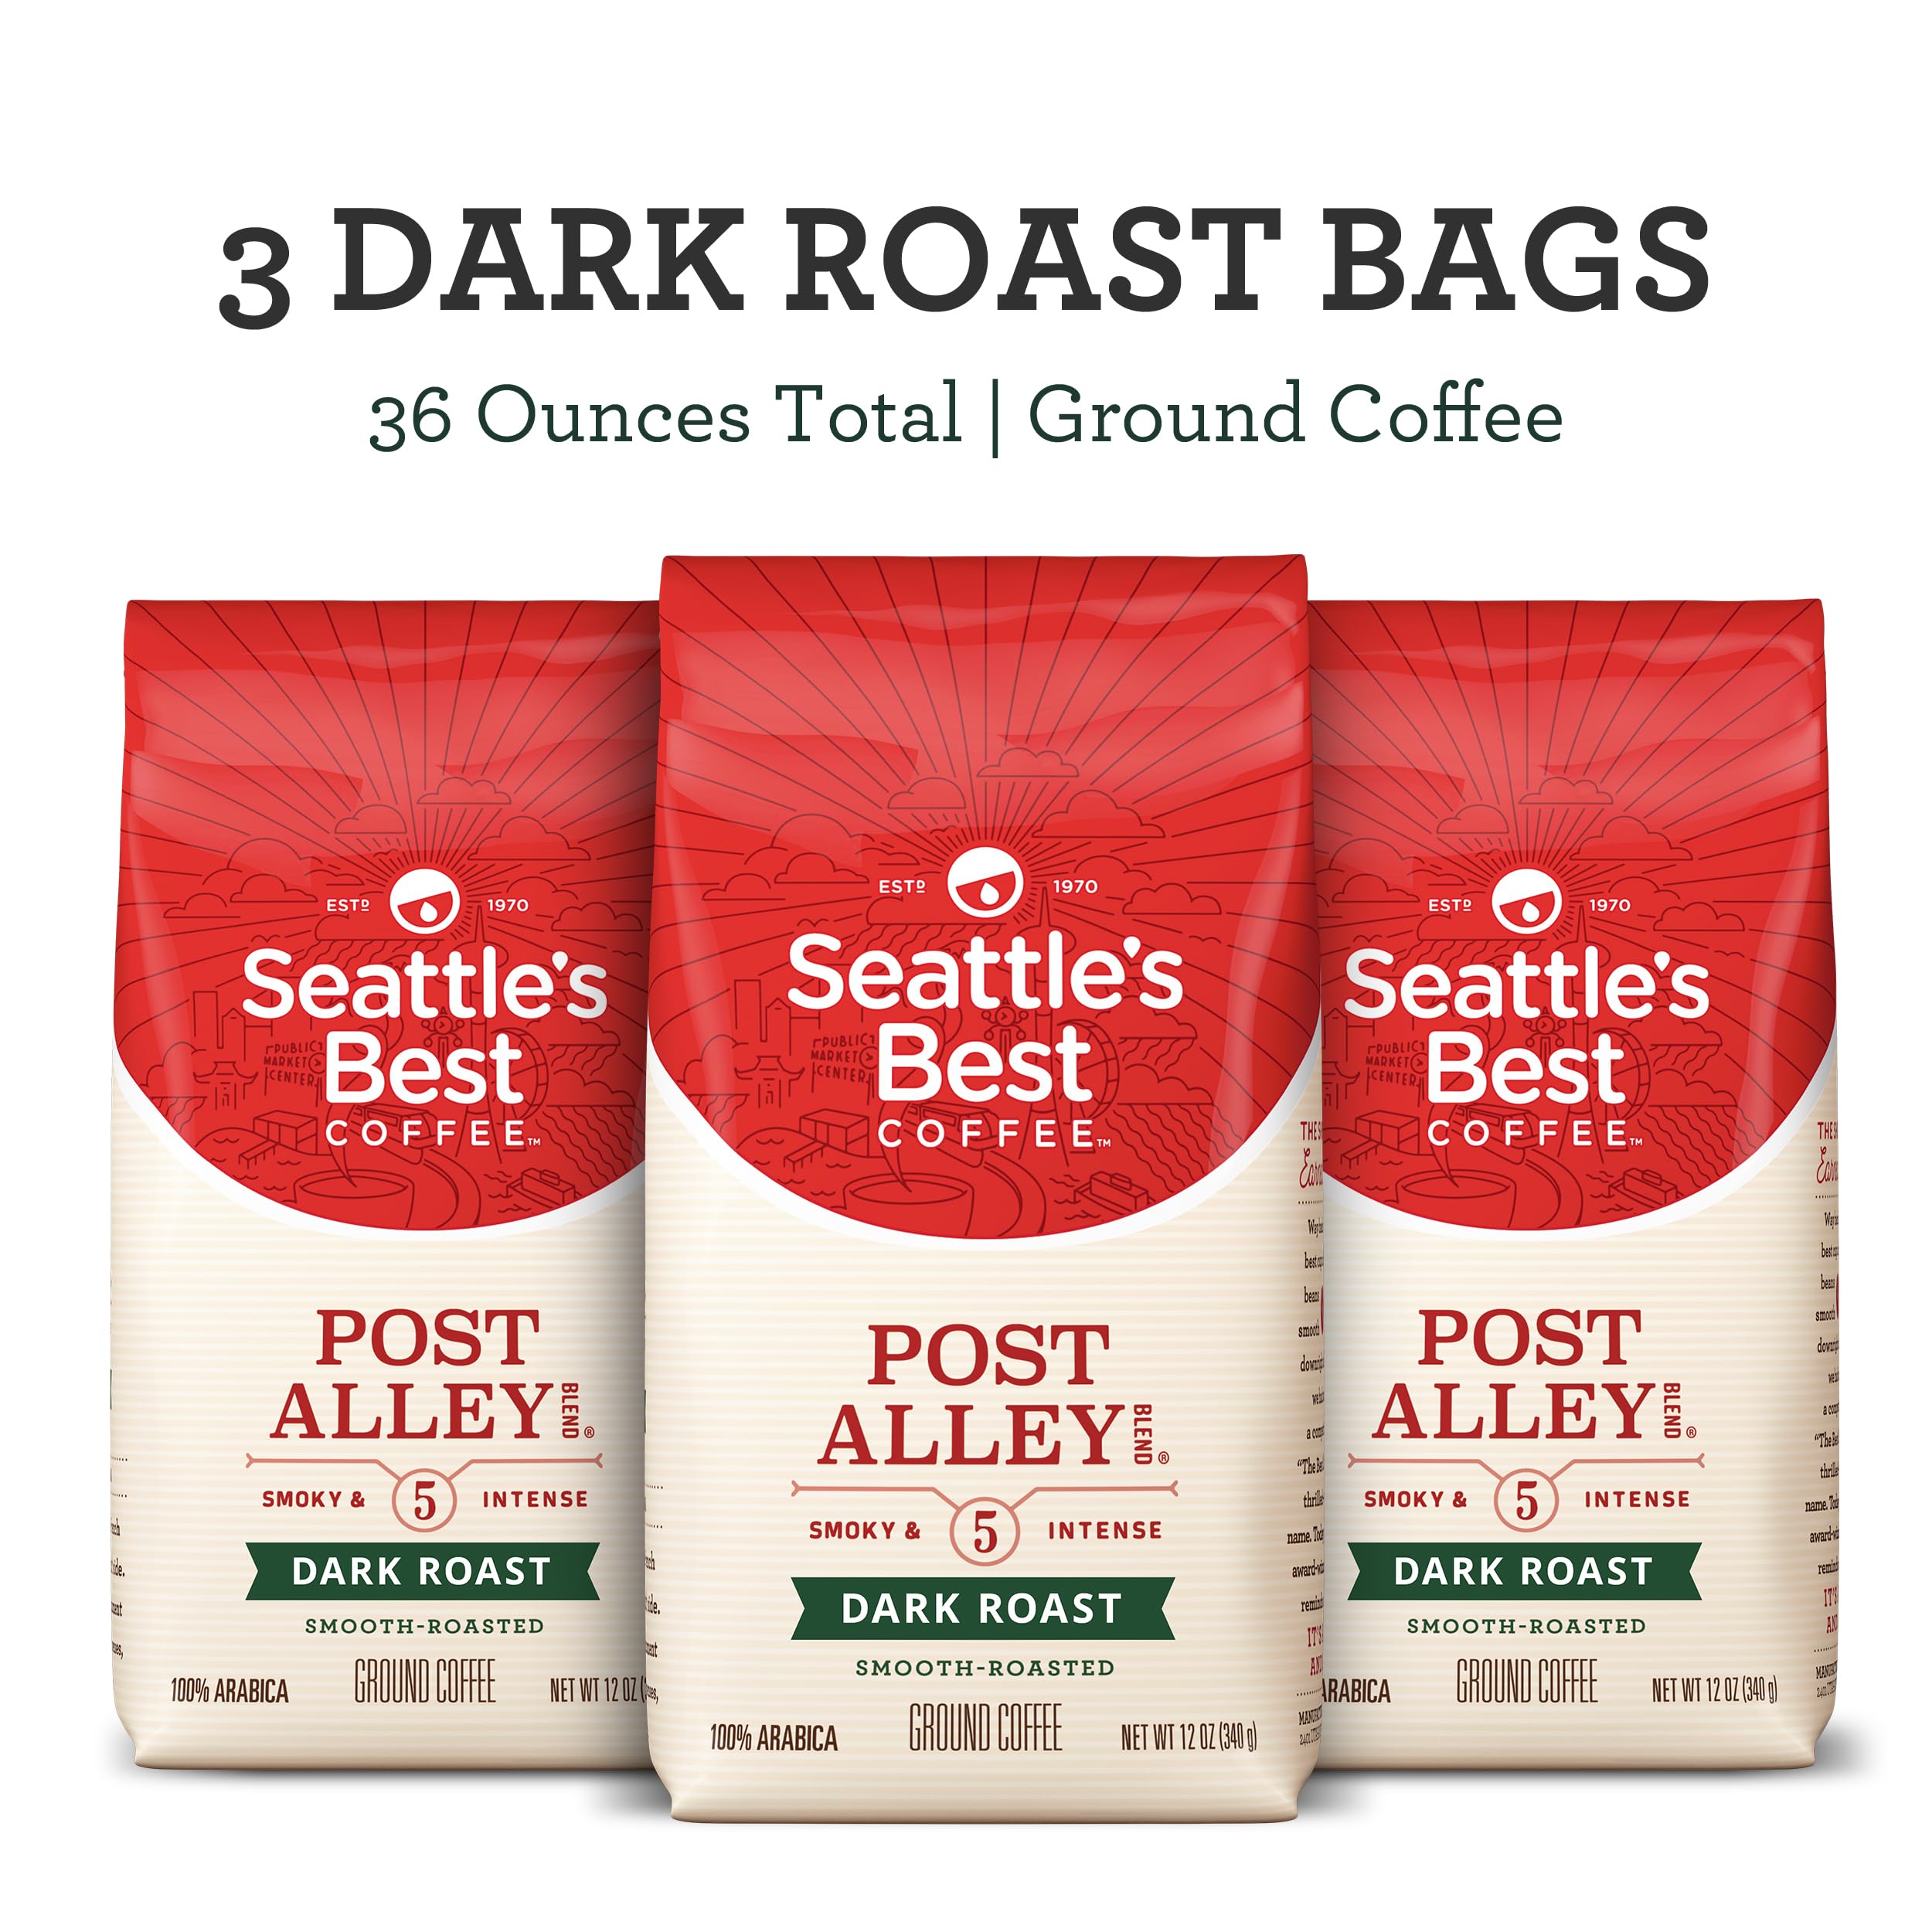 $7.86 w/ S&S: Seattle's Best Coffee Post Alley Blend Dark Roast Ground Coffee, 12 Ounce Bags (Pack of 3)